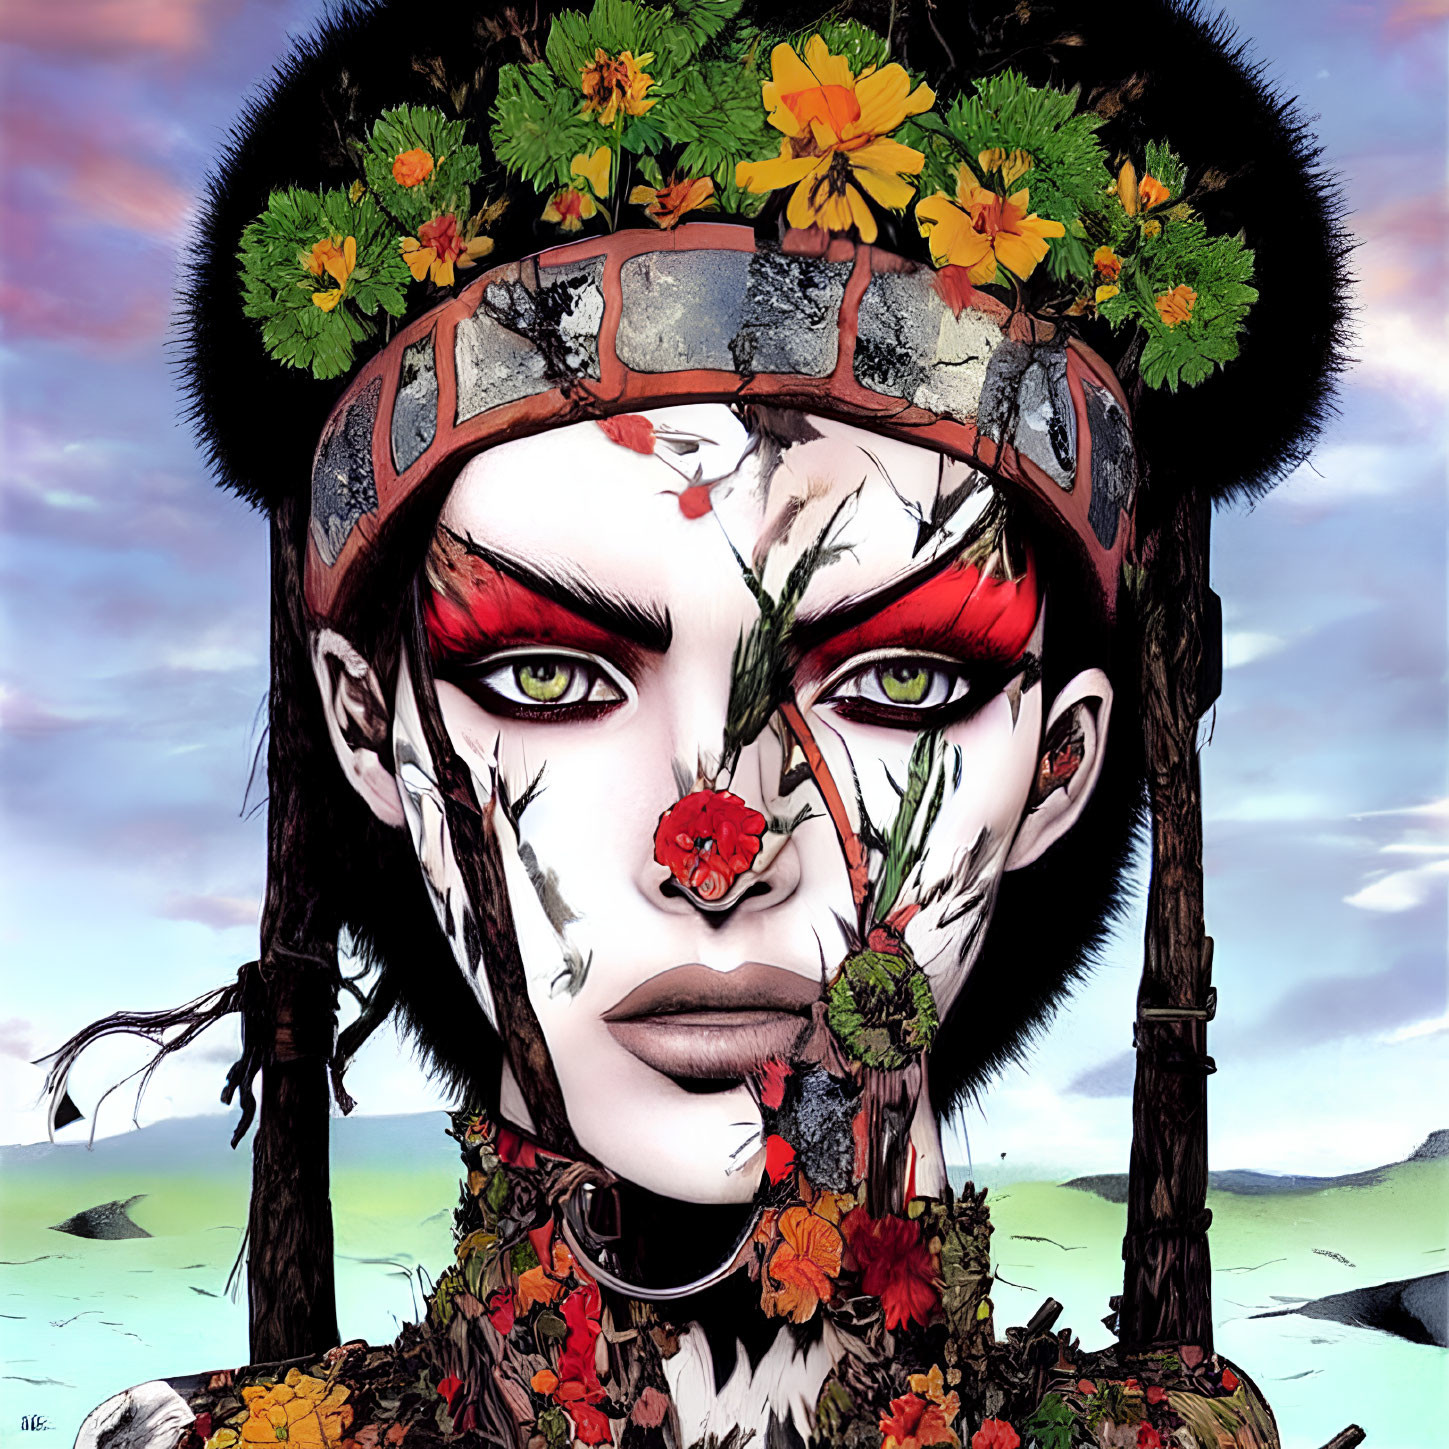 Person with intricate face paint in floral headdress against surreal landscape